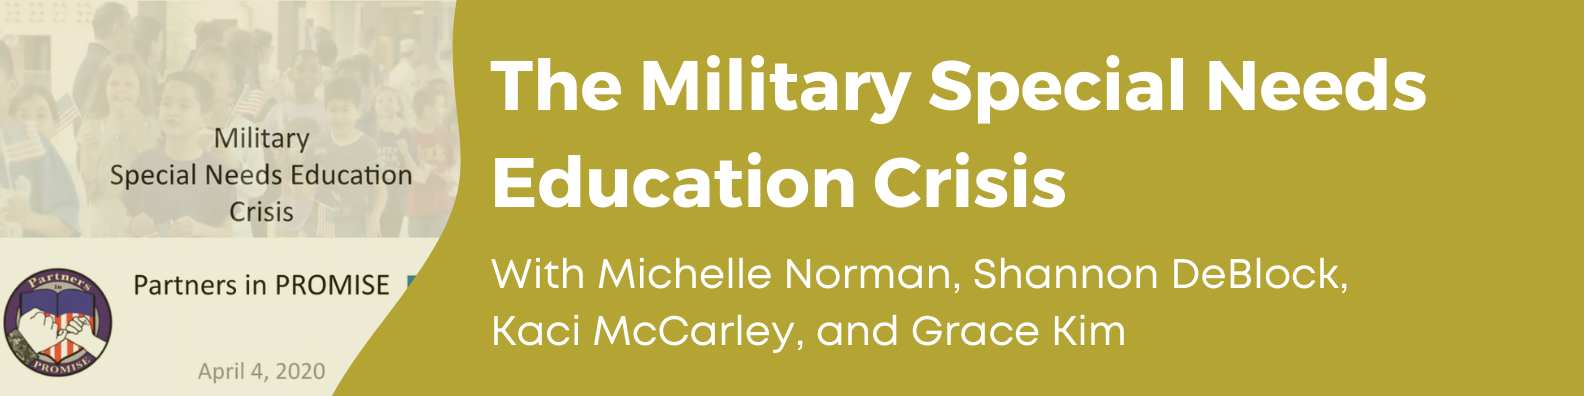 The Military Special Needs Education Crisis with Michelle Norman, Shannon DeBlock, Kaci McCarley, and Grace Kim